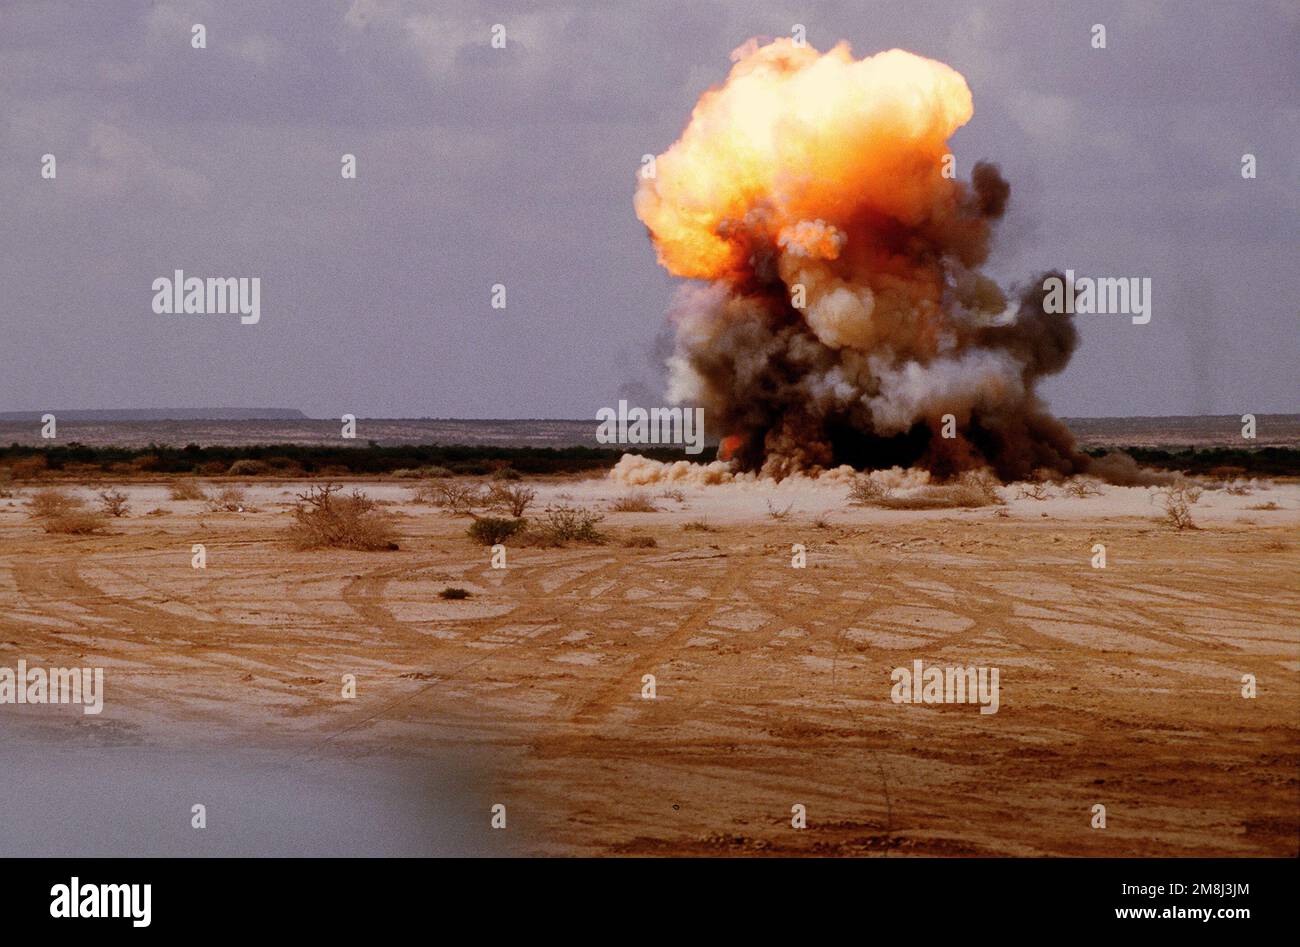 Thirty pounds of confiscated dynamite is detonated by German soldiers on the outskirts of Belet Weyne. The Germans are of the UN contingent supporting Operation CONTINUE HOPE. Subject Operation/Series: CONTINUE HOPE Base: Belet Uen Country: Somalia (SOM) Stock Photo